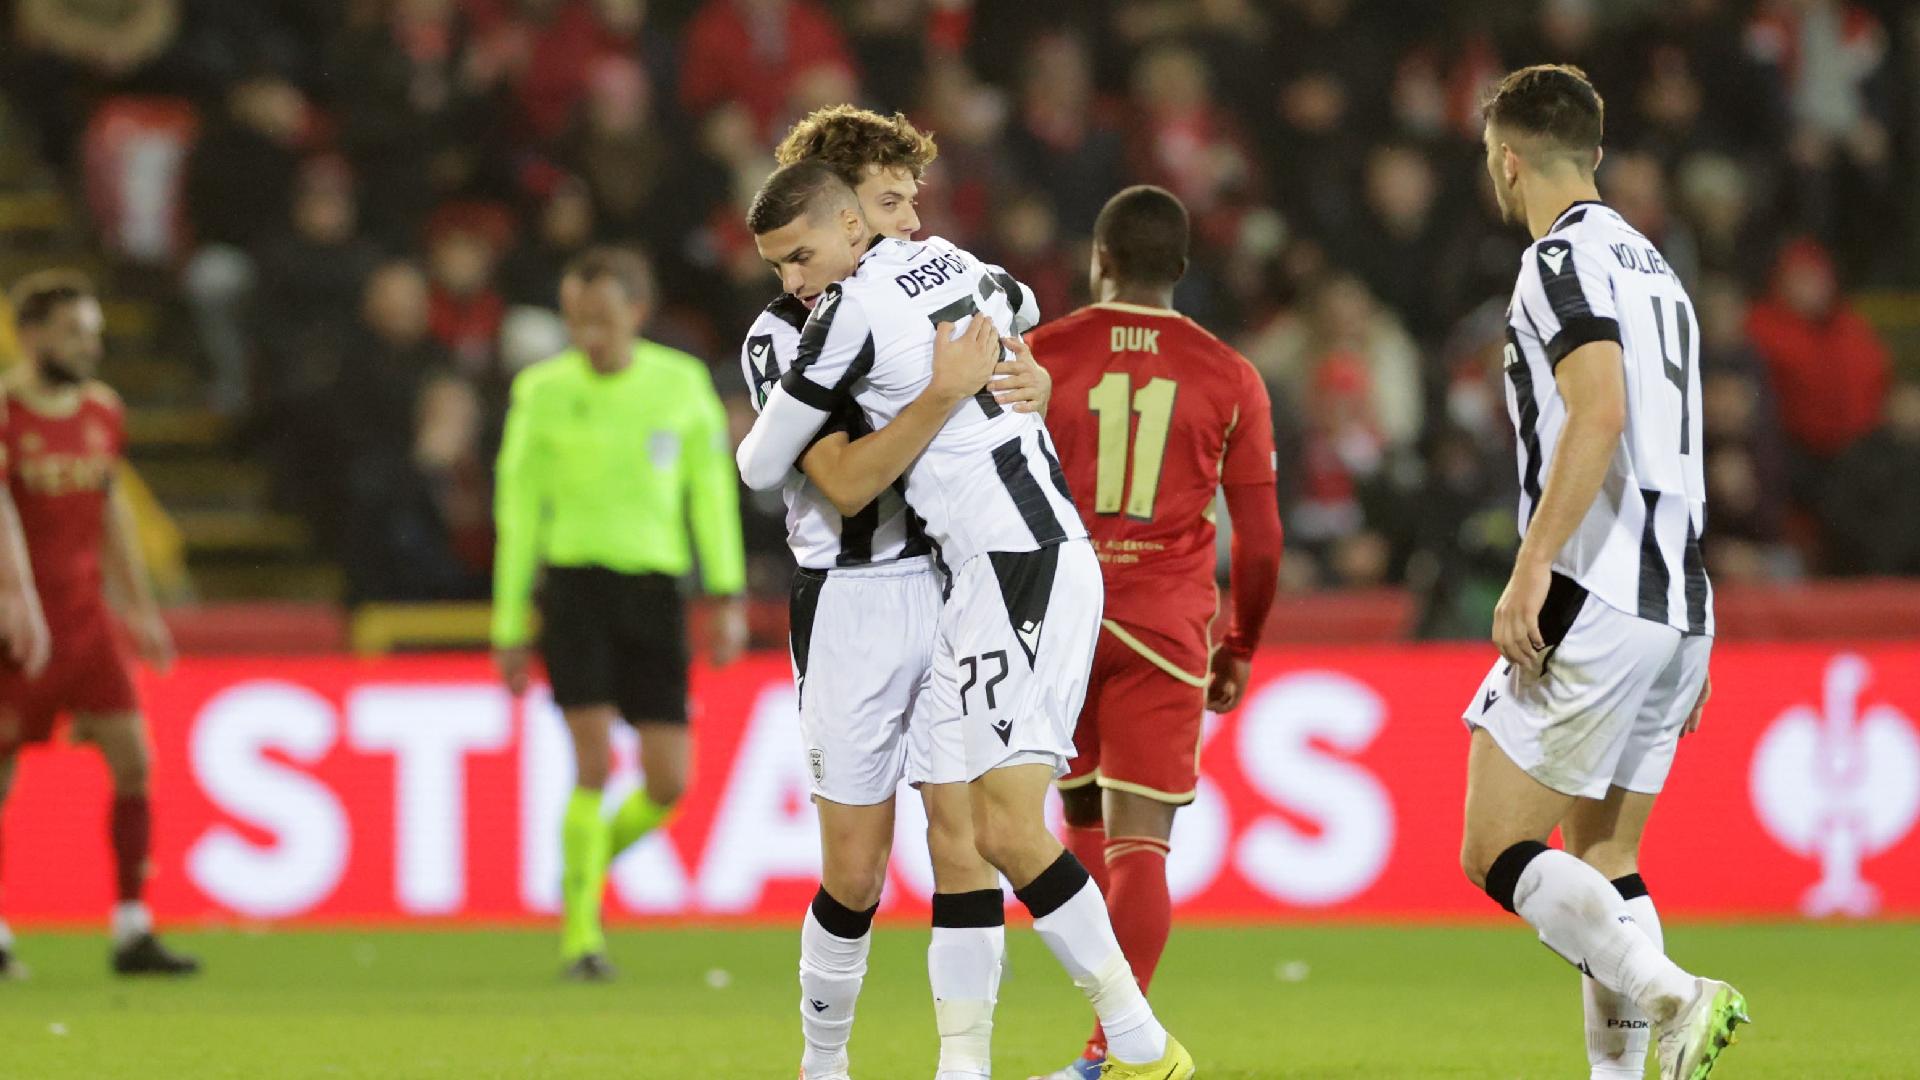 Aberdeen heartbreak as PAOK rally from two goals down to grab last-gasp winner